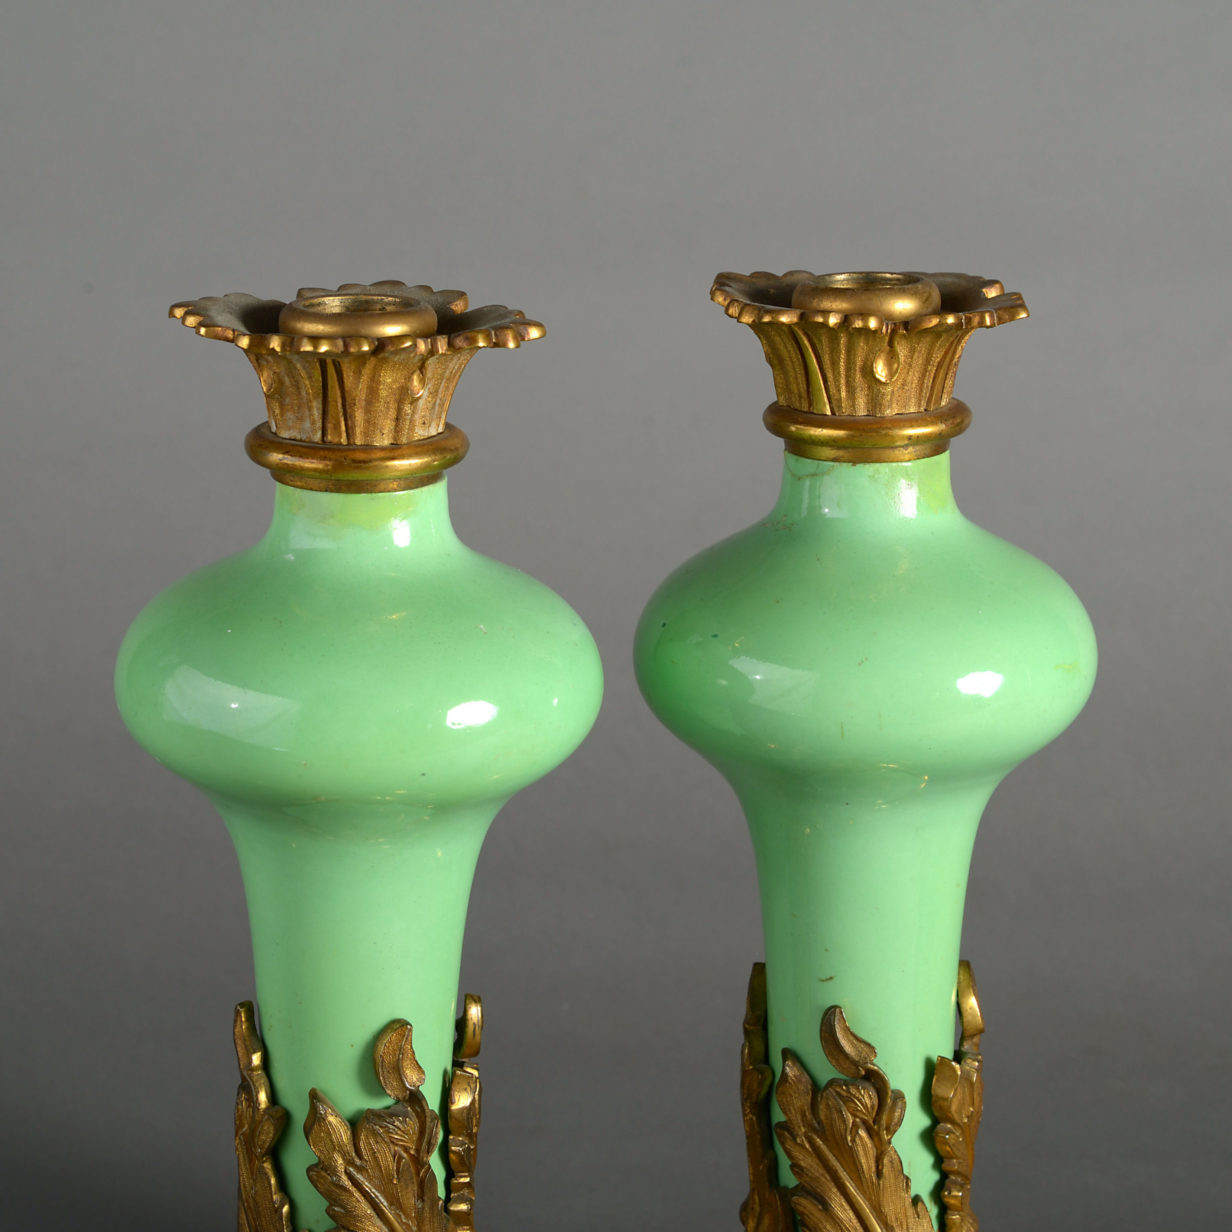 A pair of 19th century rococo porcelain and ormolu candelabra